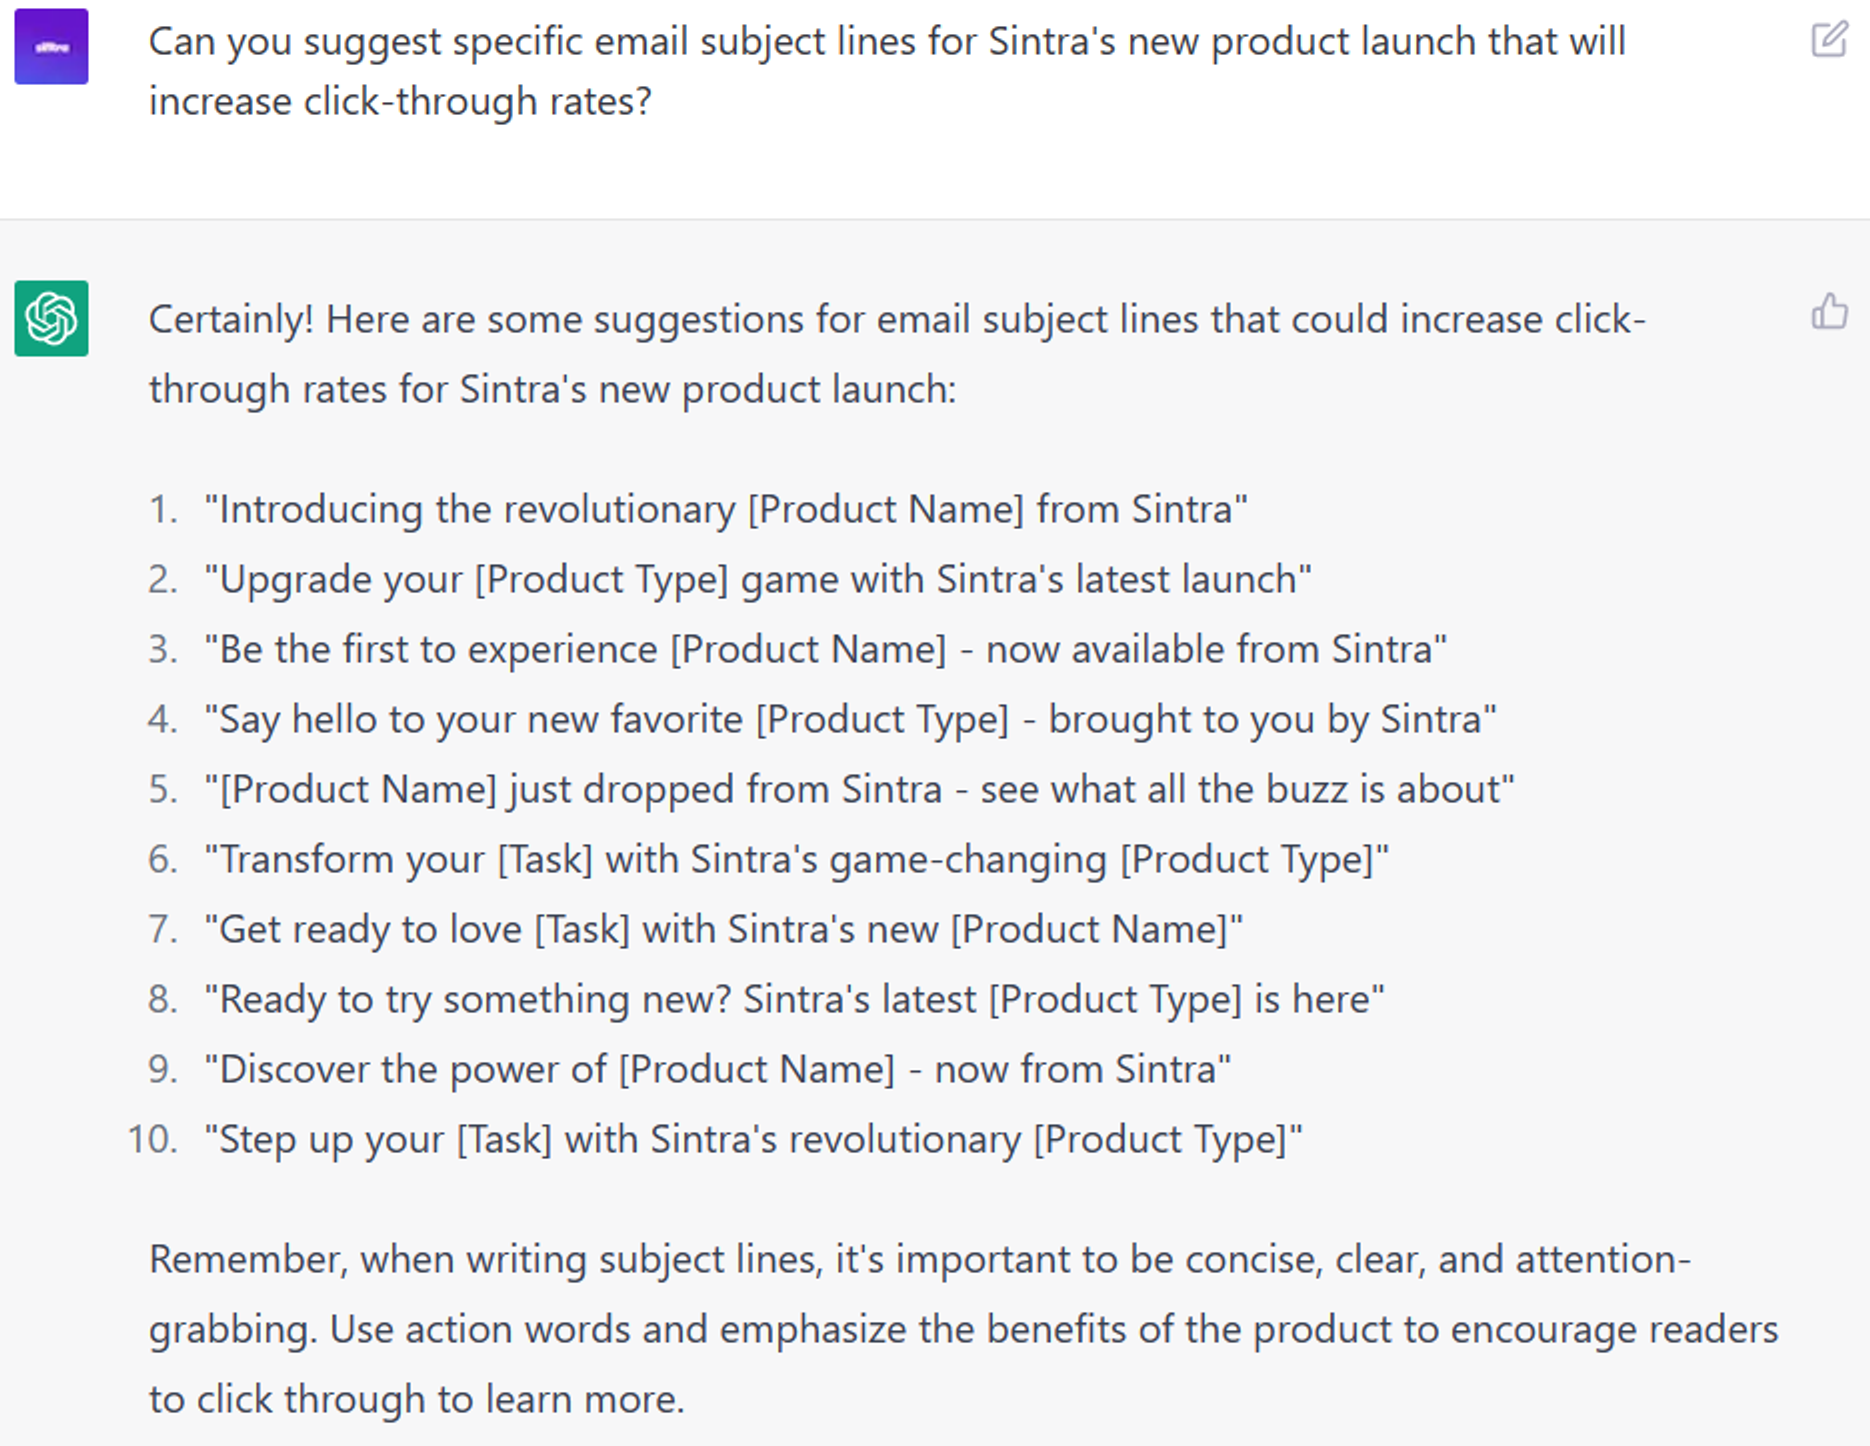  6 Strategic ChatGPT Prompts: Generating email content ideas